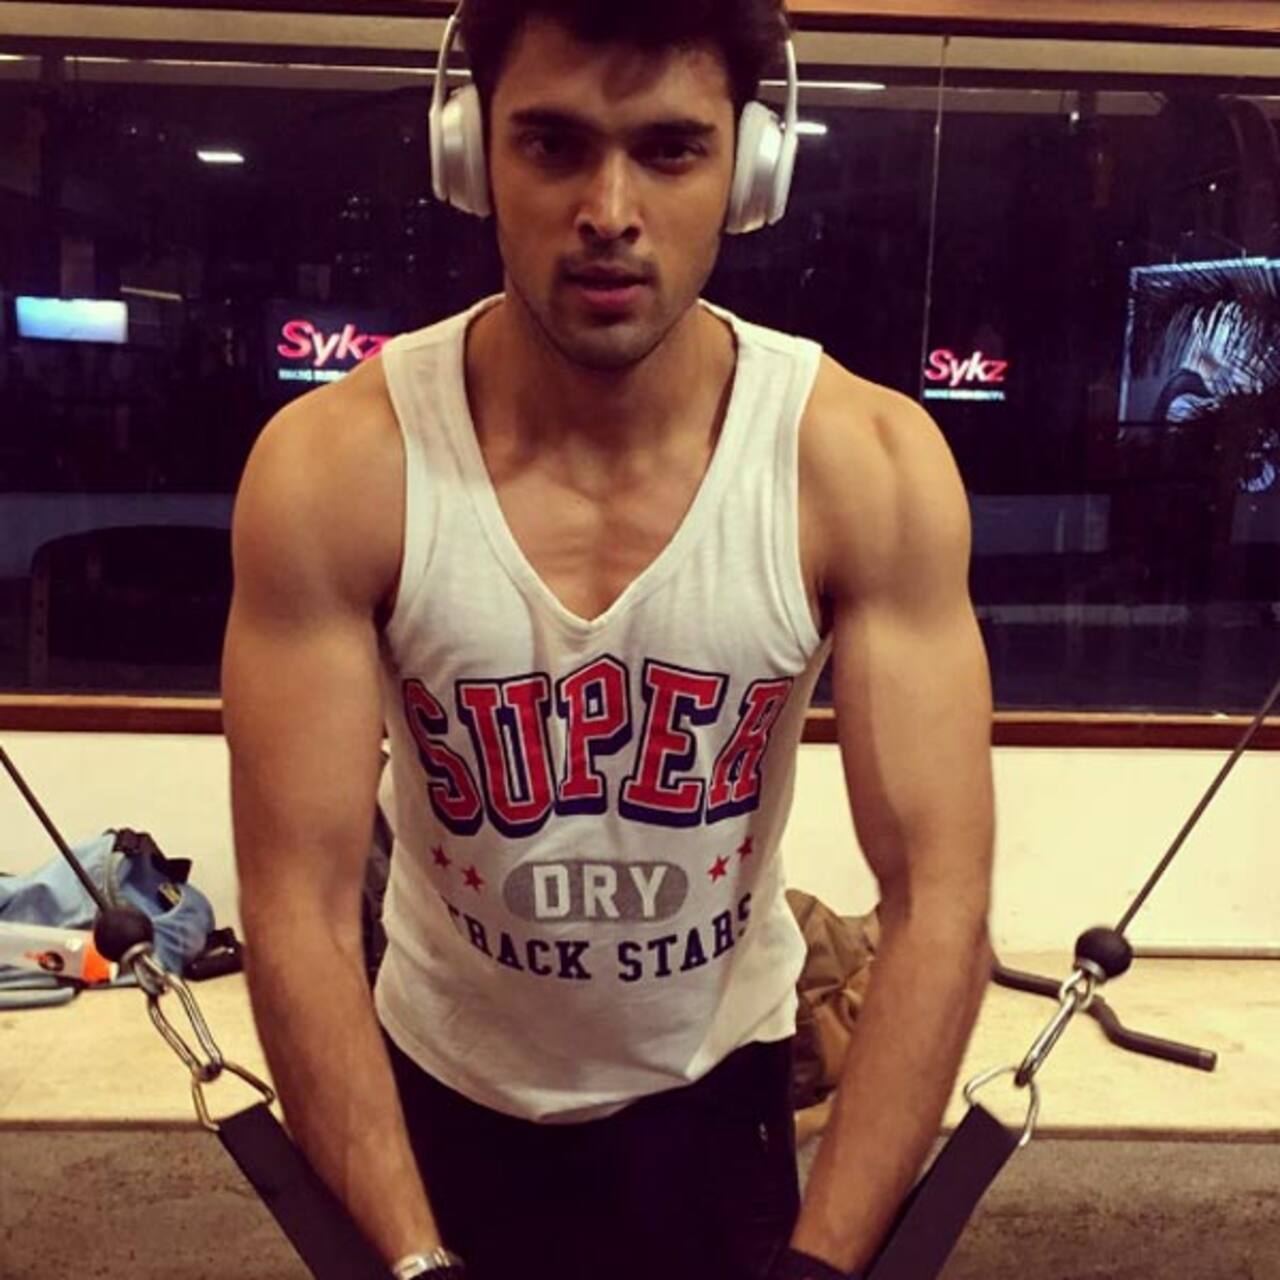 Pics Of Parth Samthaan That Will Make You Drool Over The New Television Sensation